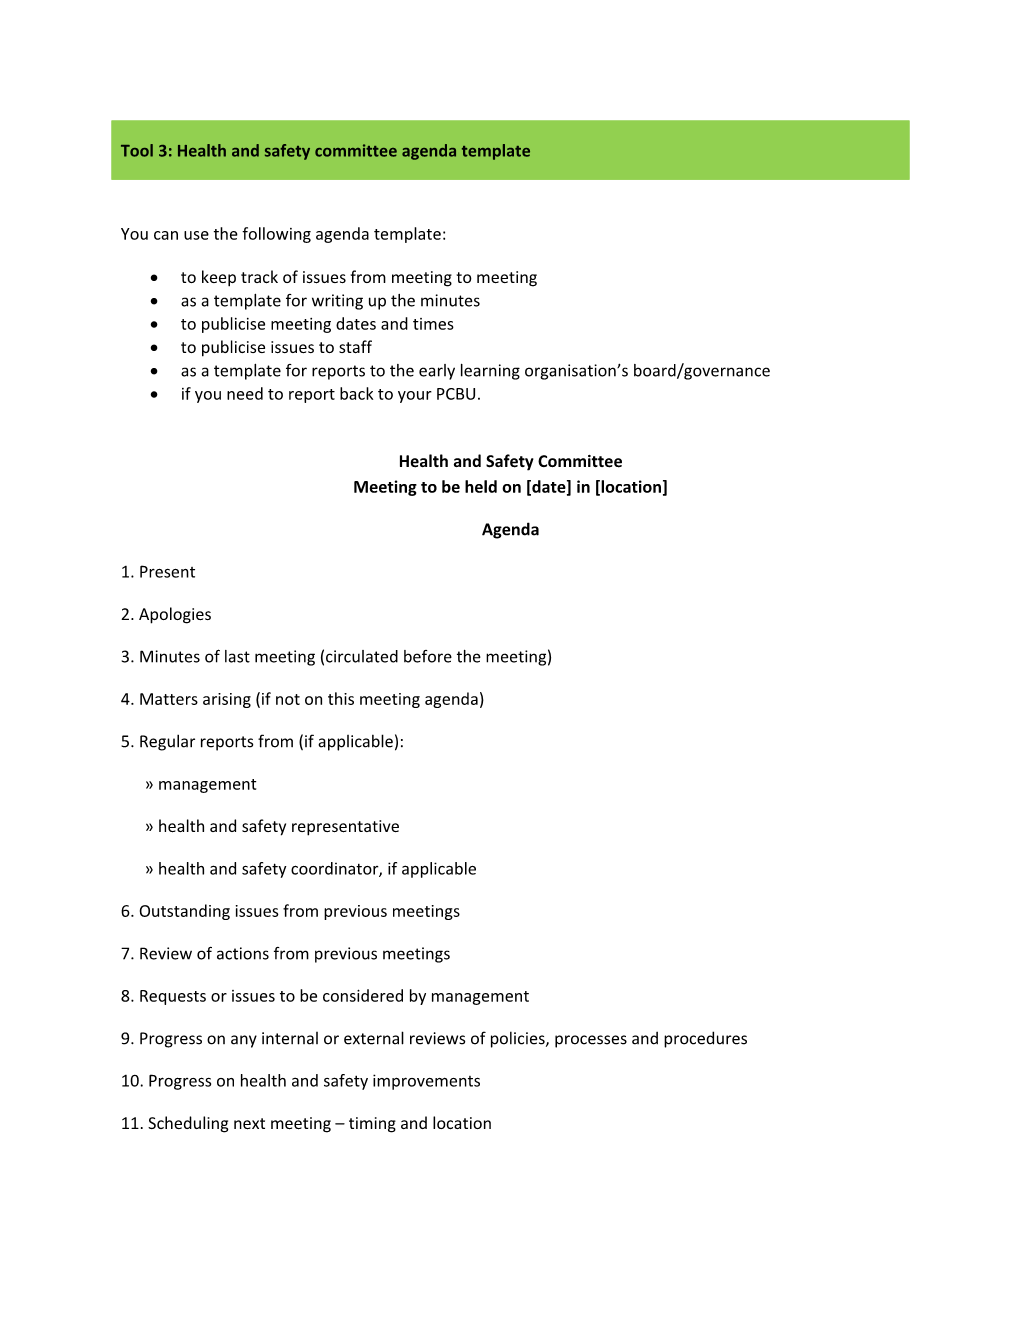 Health and Safety Committee Agenda Template